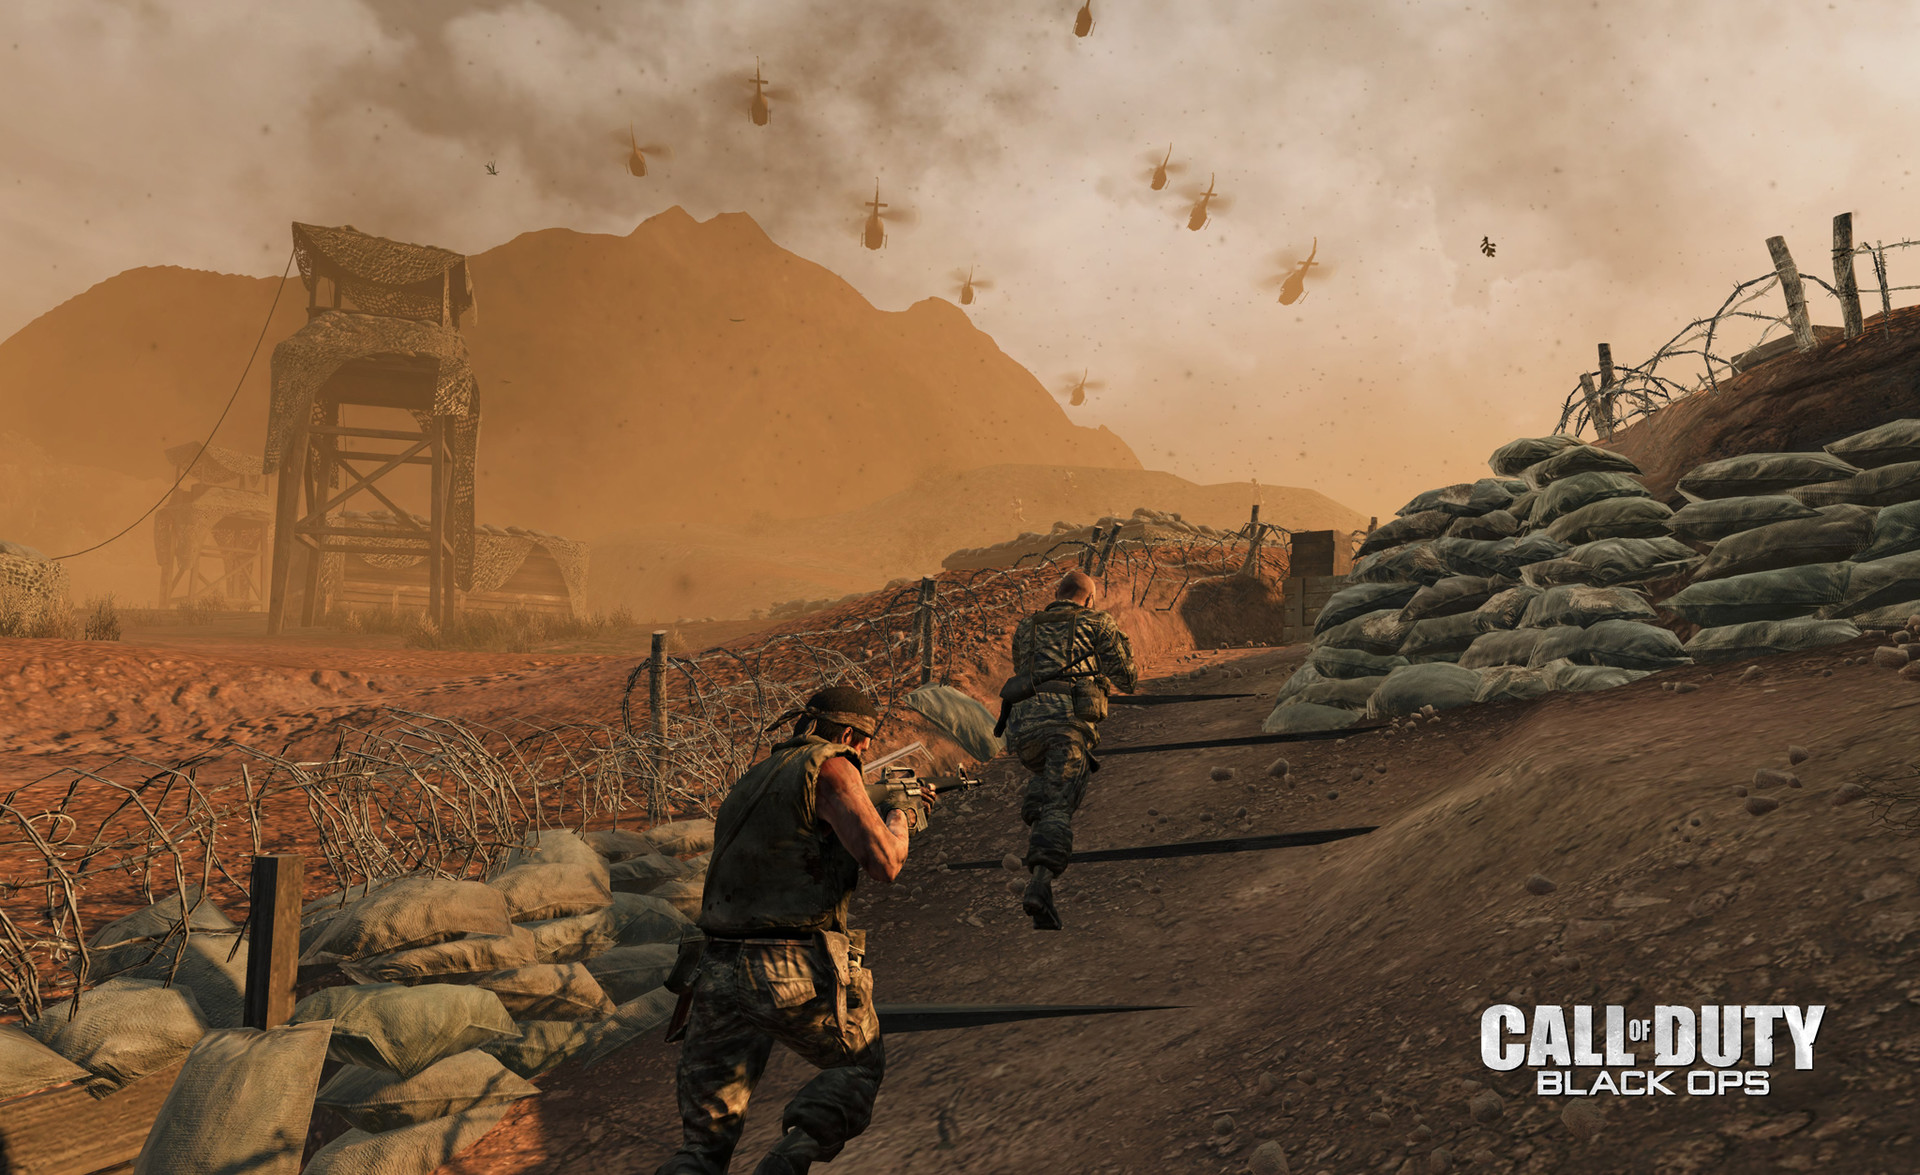 mike-curran-s-o-g-marine-base-environment-call-of-duty-black-ops-2010